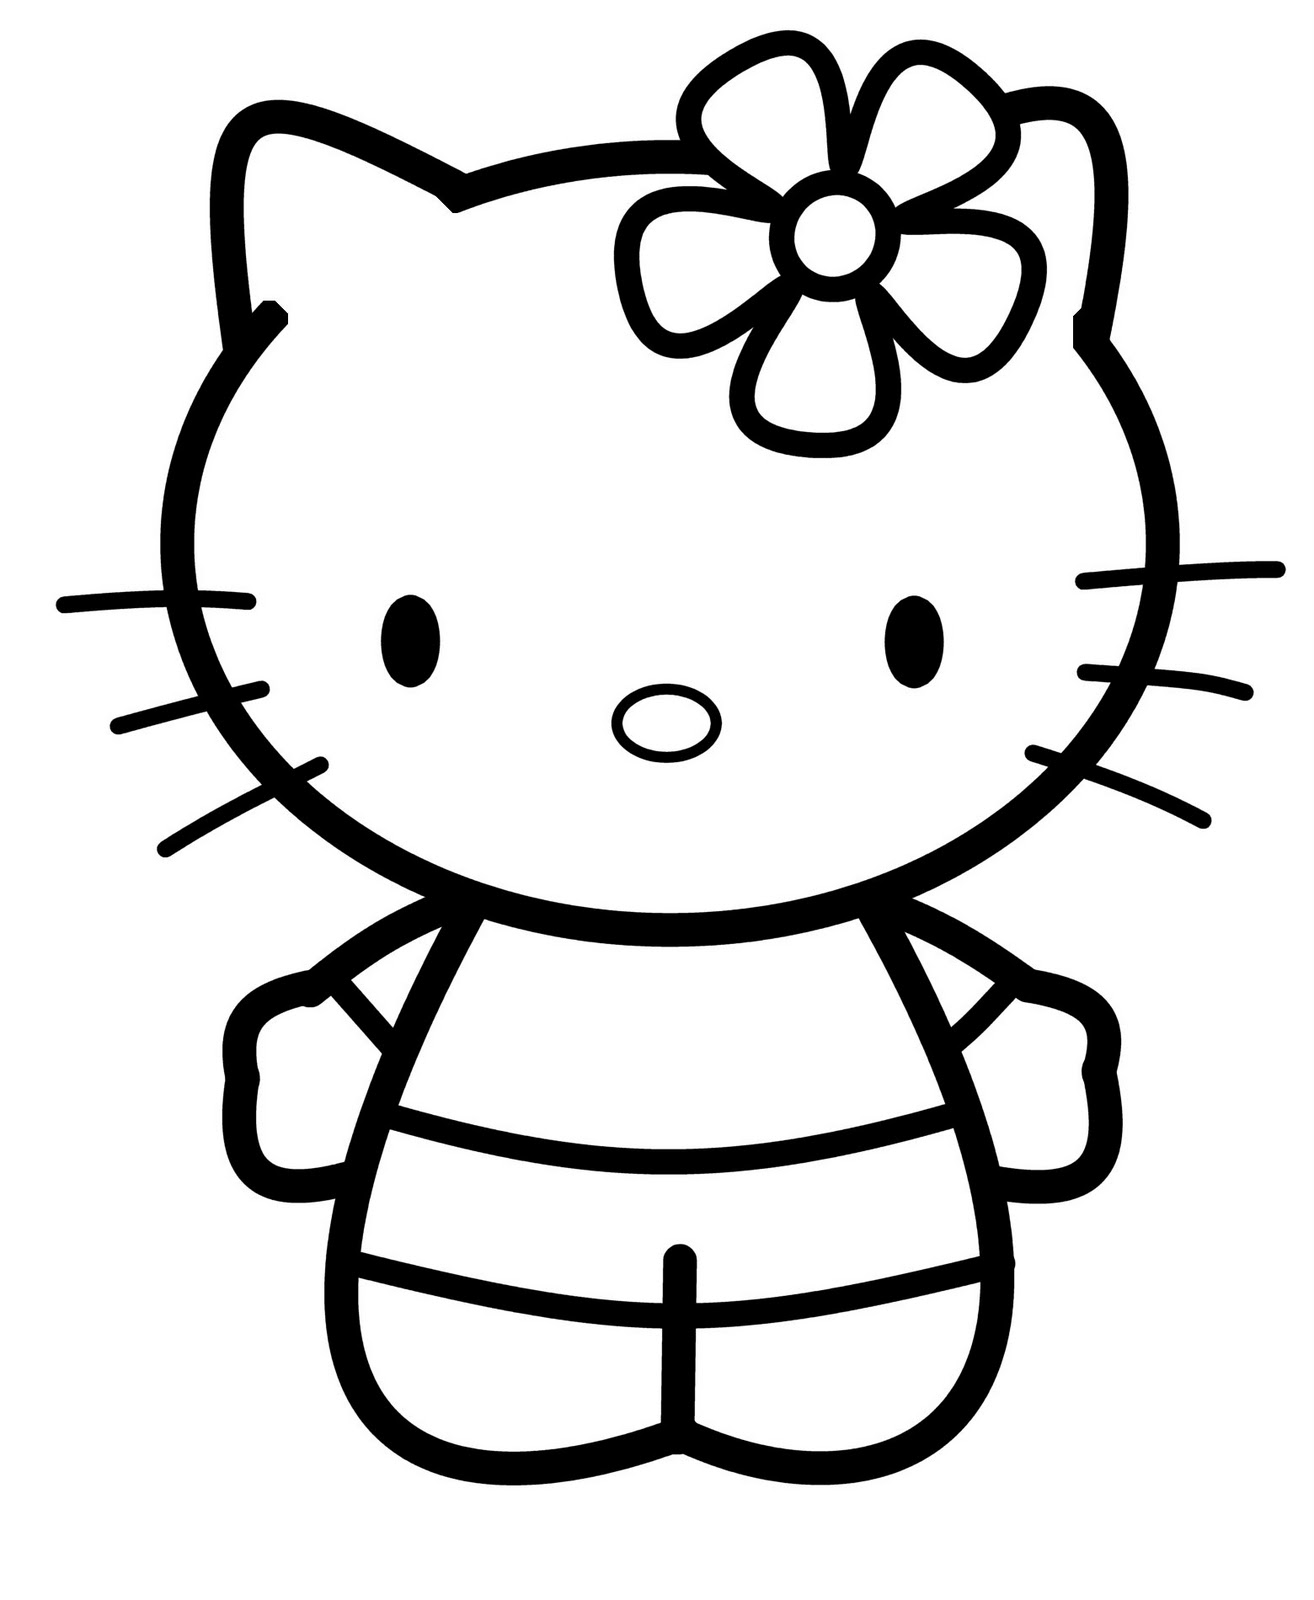 Step-by-step guide on how to draw Hello Kitty